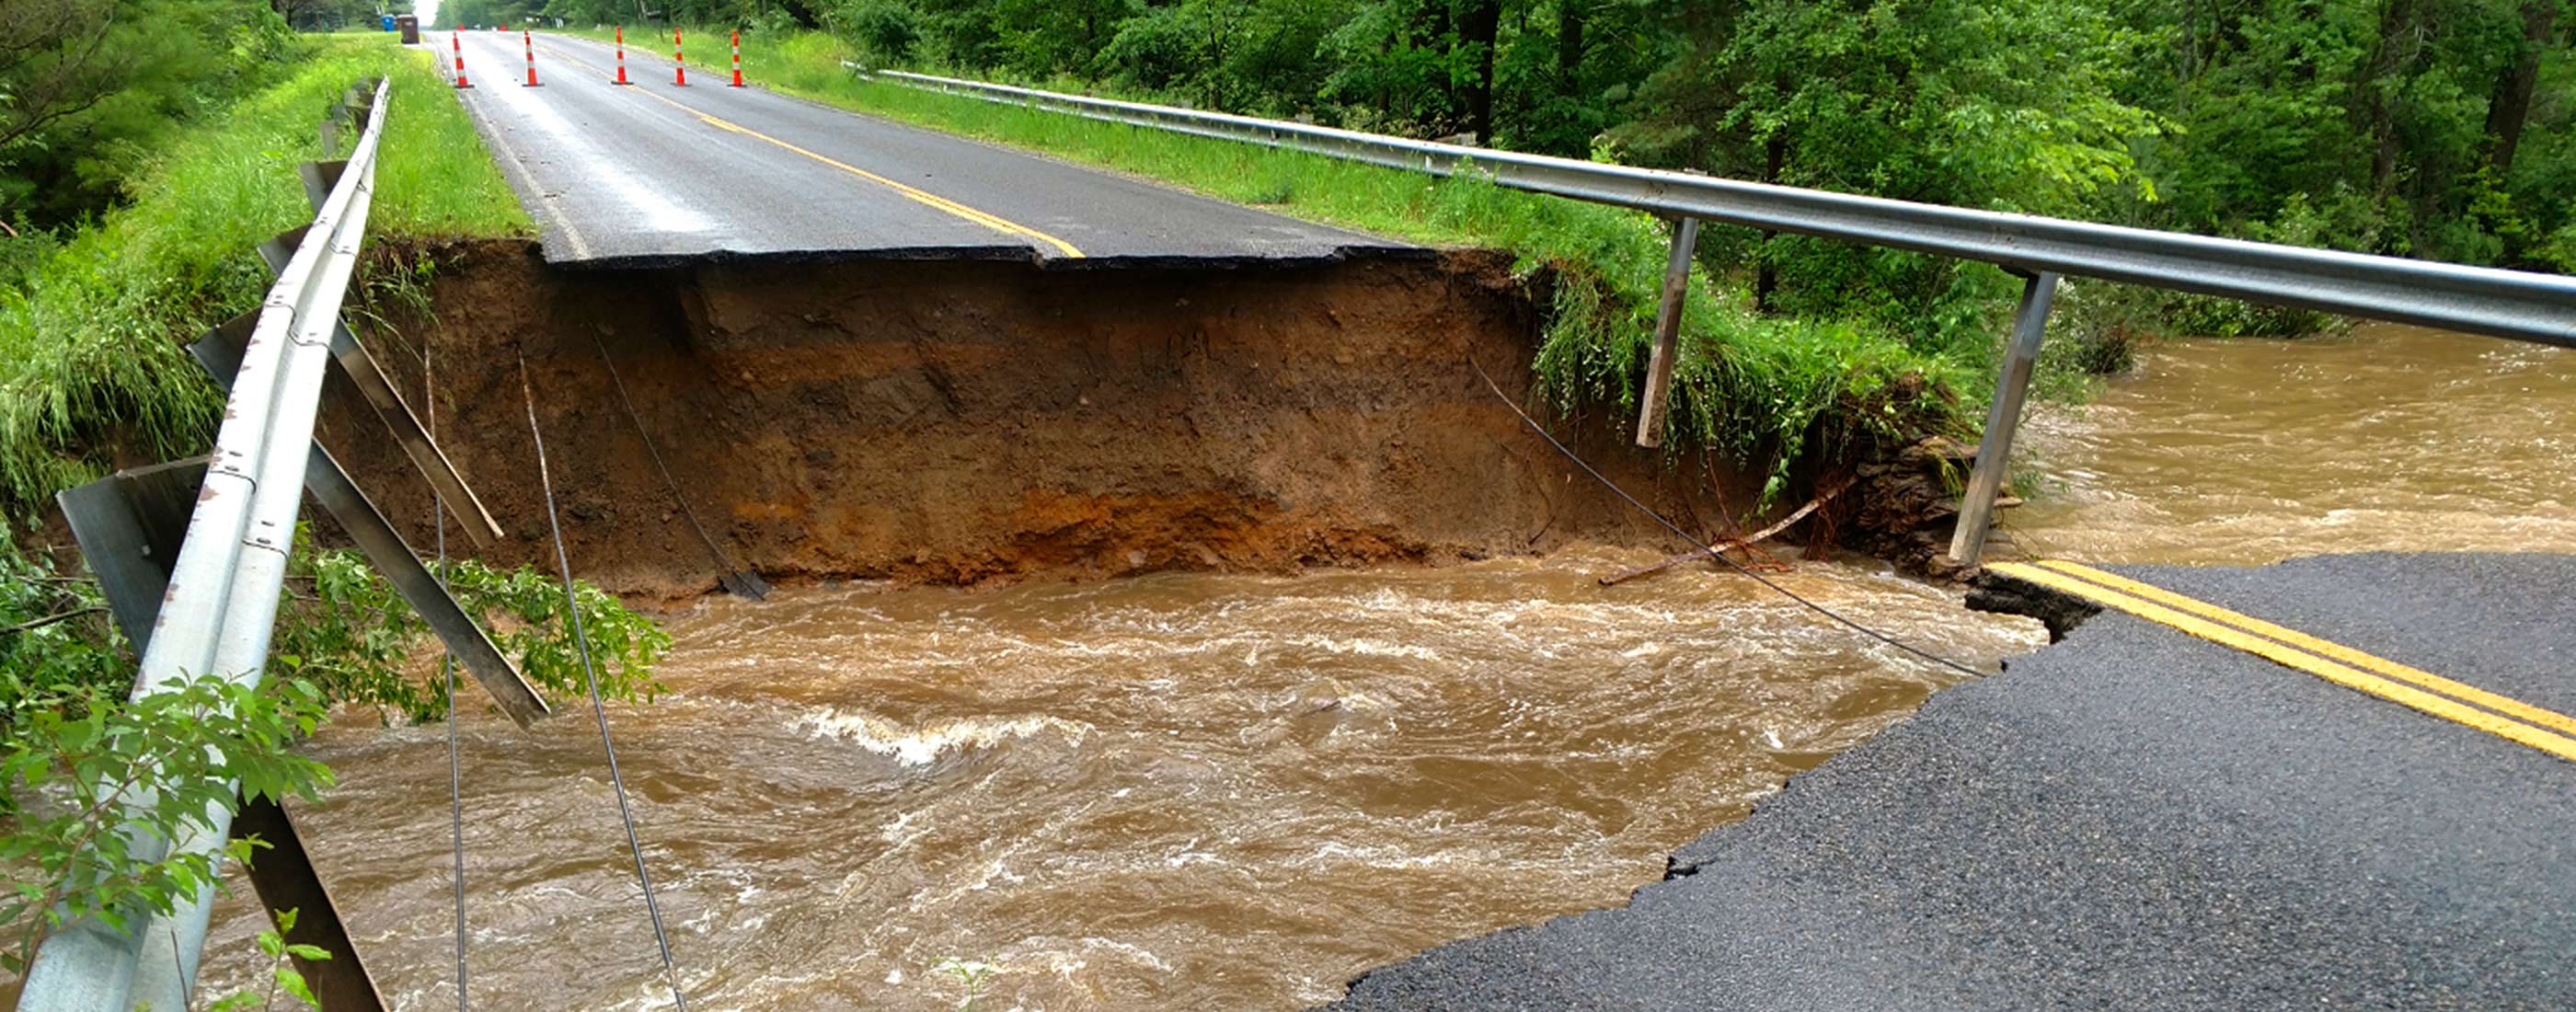 Extensive roadway damage in Midland County, Michigan after flooding.